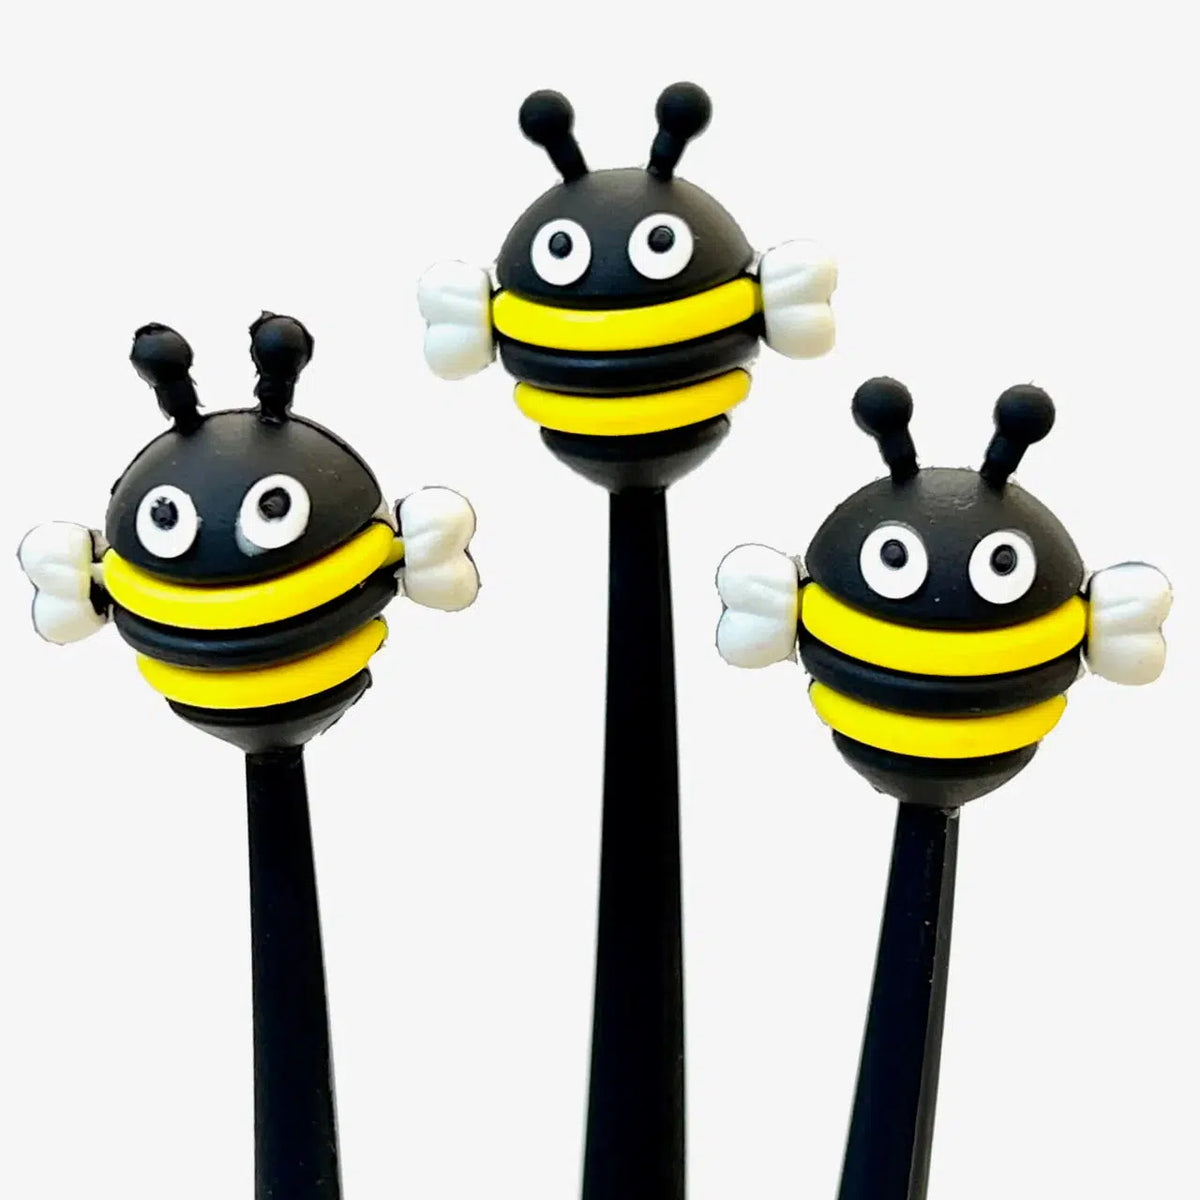 Gel Pen - Bee-Stationery-BCMini-Yellow Springs Toy Company